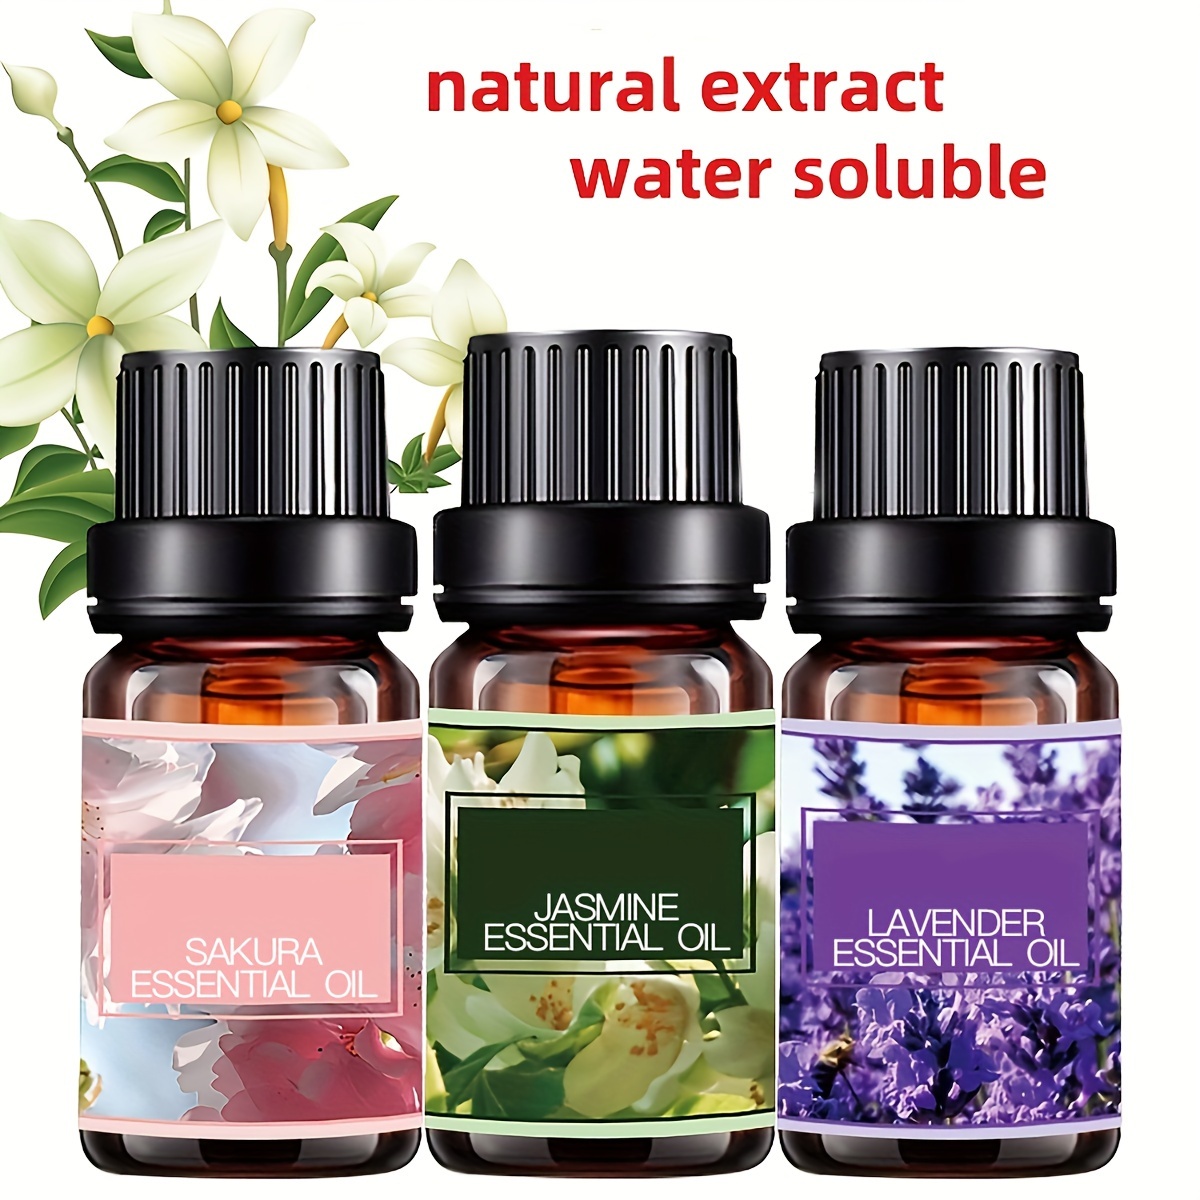 Water soluble essence anti-tobacco aromatherapy air freshener Ambar perfumes  50 ml for burner humidifier and dried flowers diffuser - AliExpress